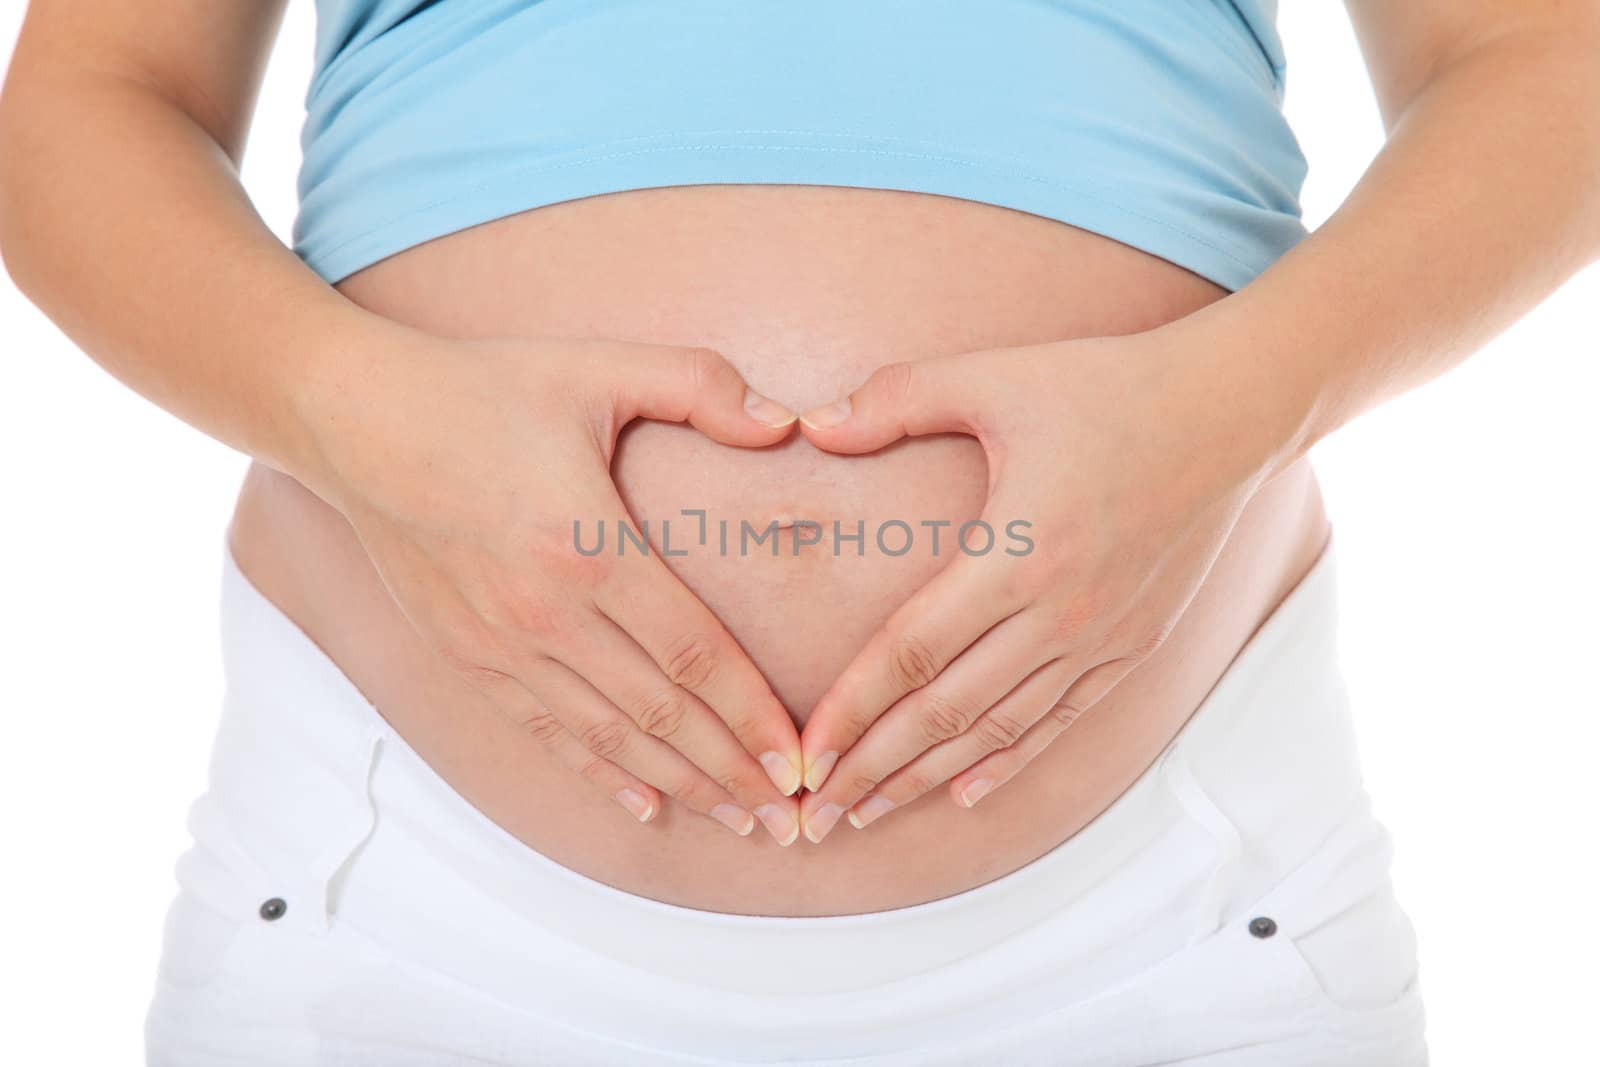 Pregnant woman forming heart out of her hands on her baby bump. All on white background.